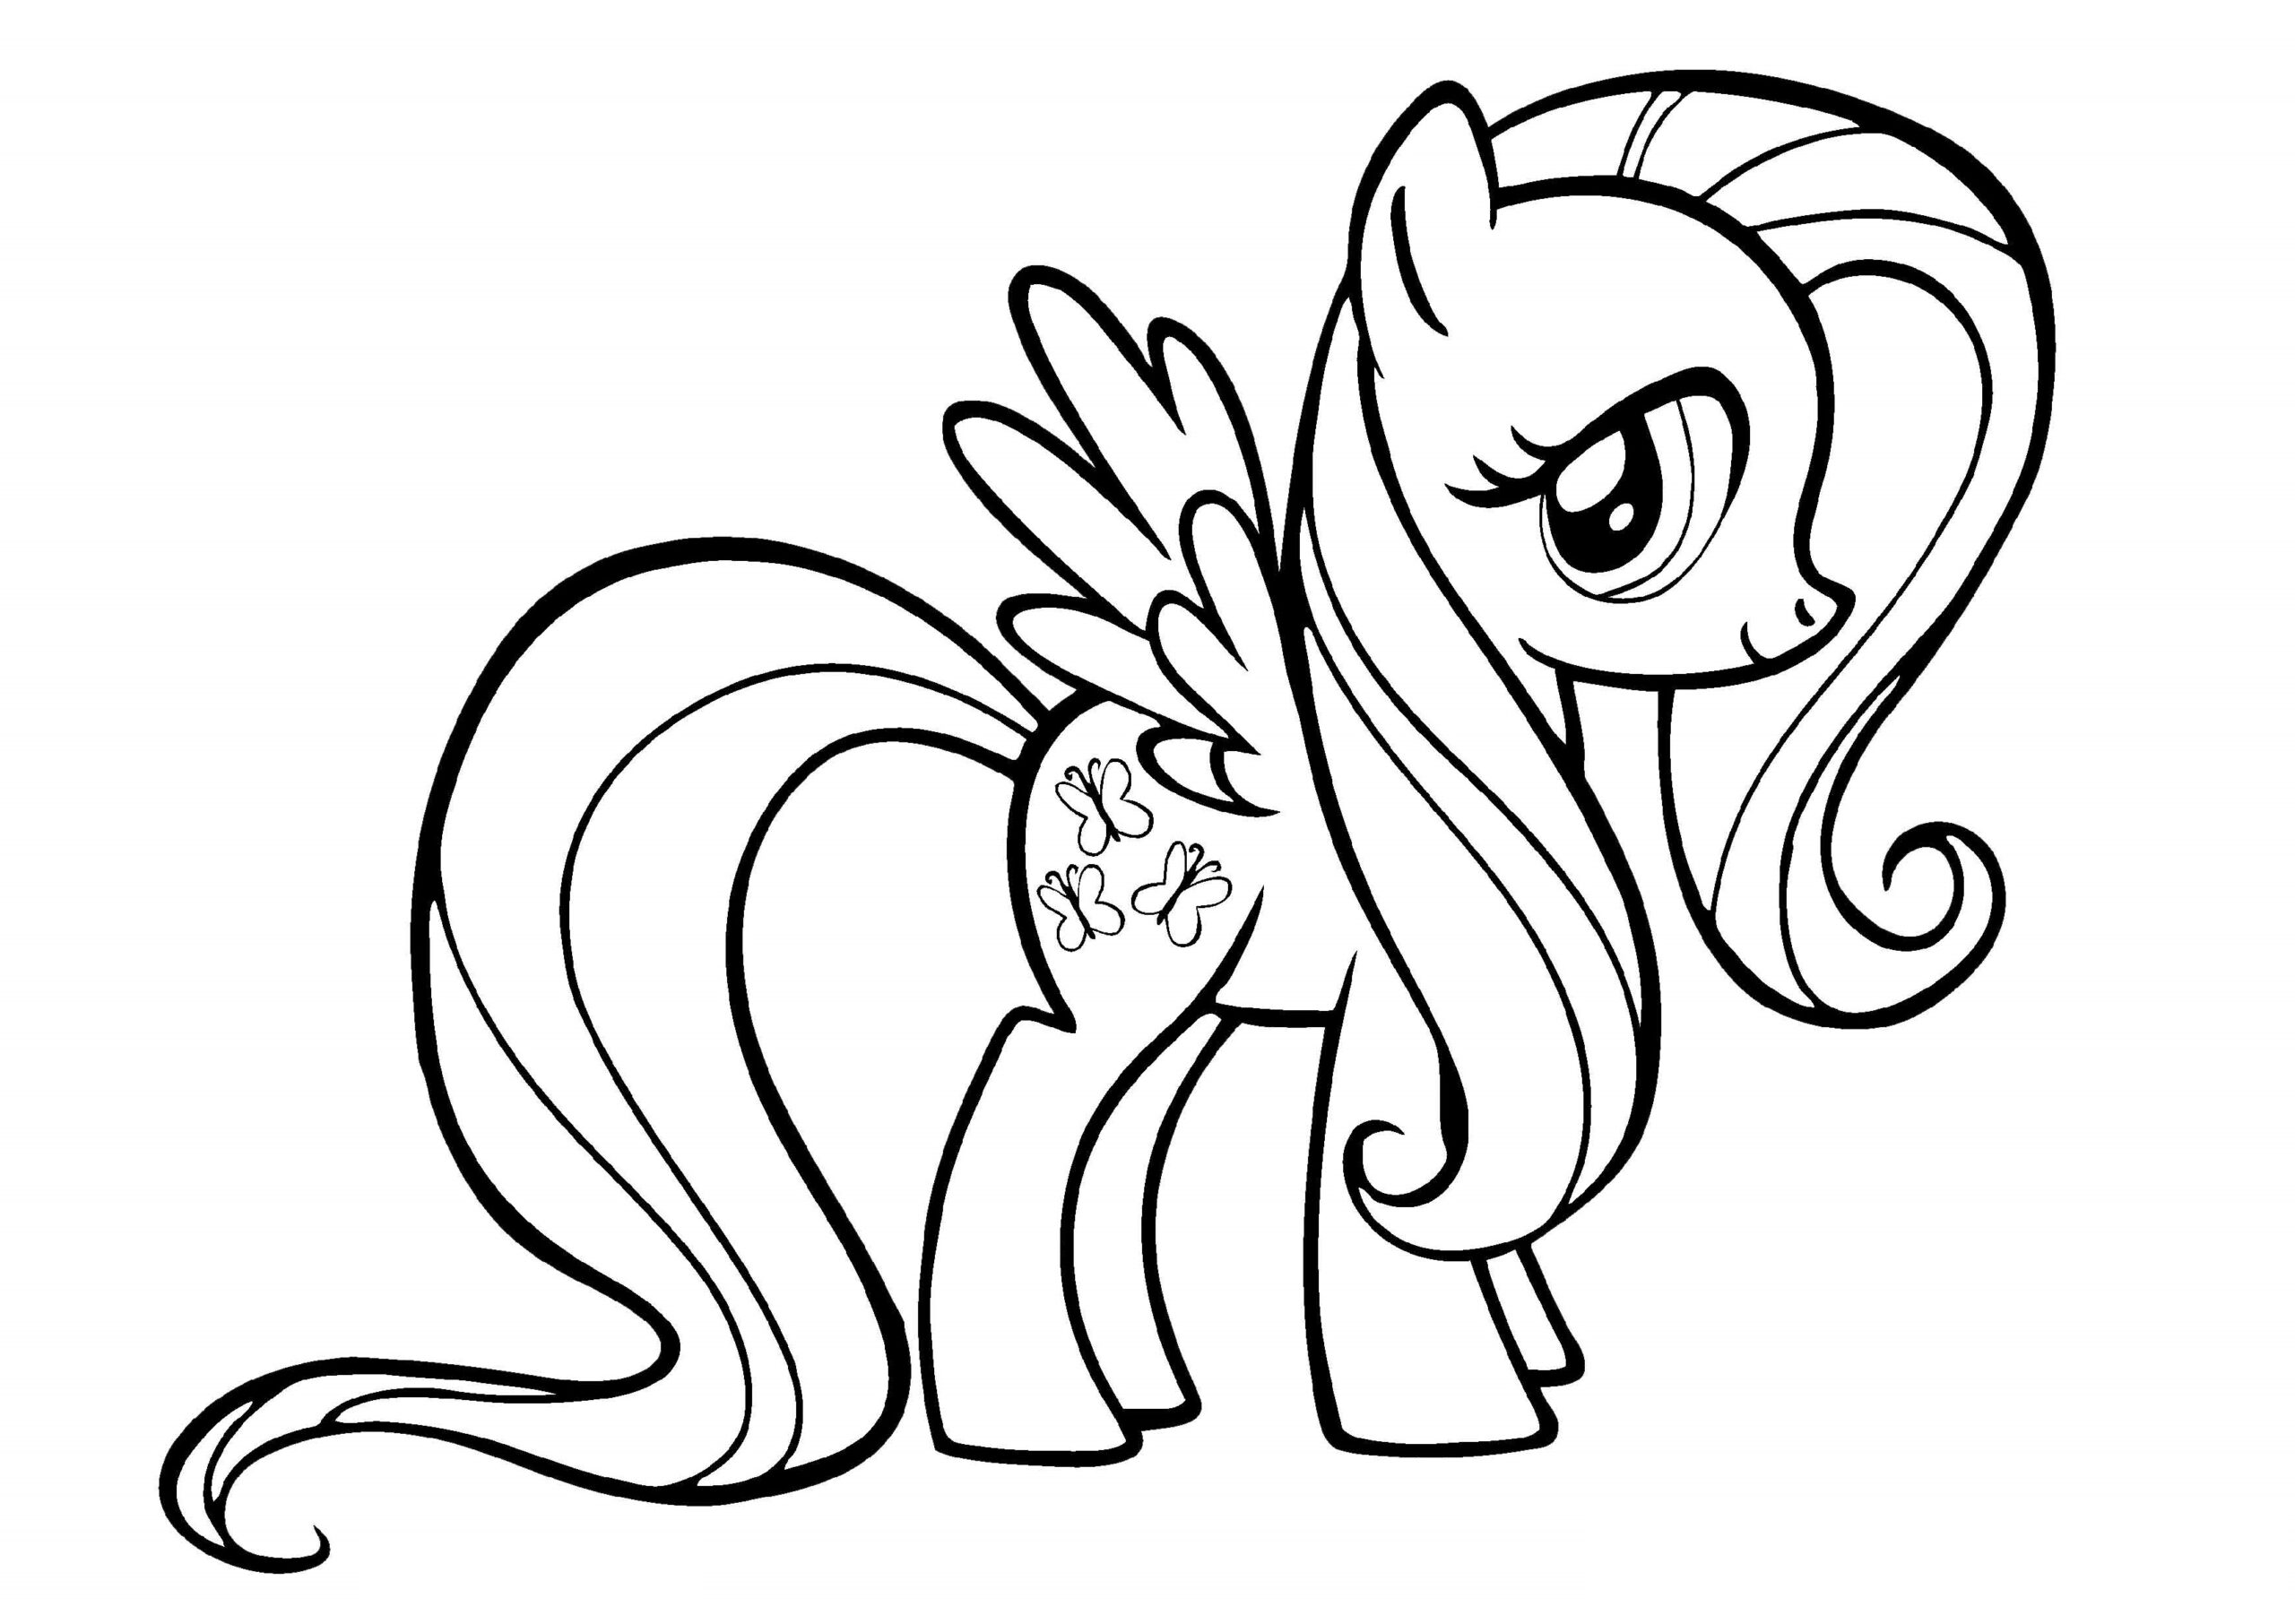 ️Little Pony Coloring Pages Pdf Free Download| Goodimg.co serapportantà Coloriage My Little Pony